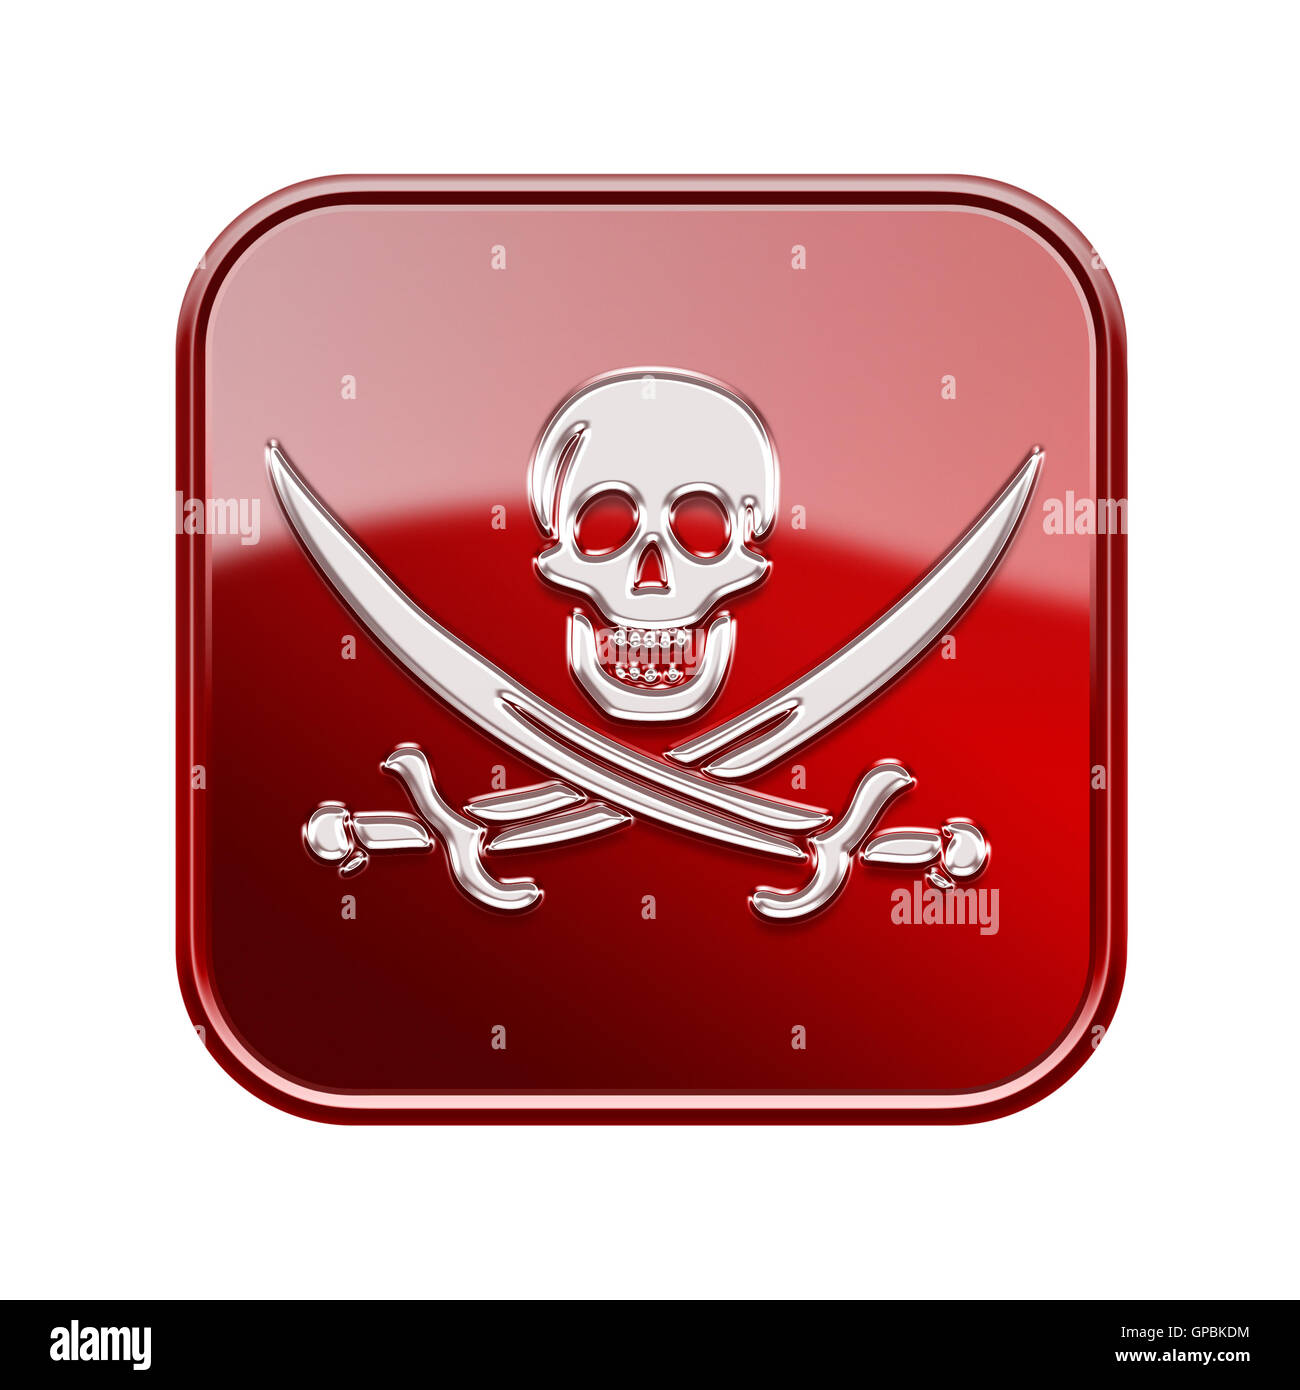 Pirate icon glossy red, isolated on white backround Stock Photo